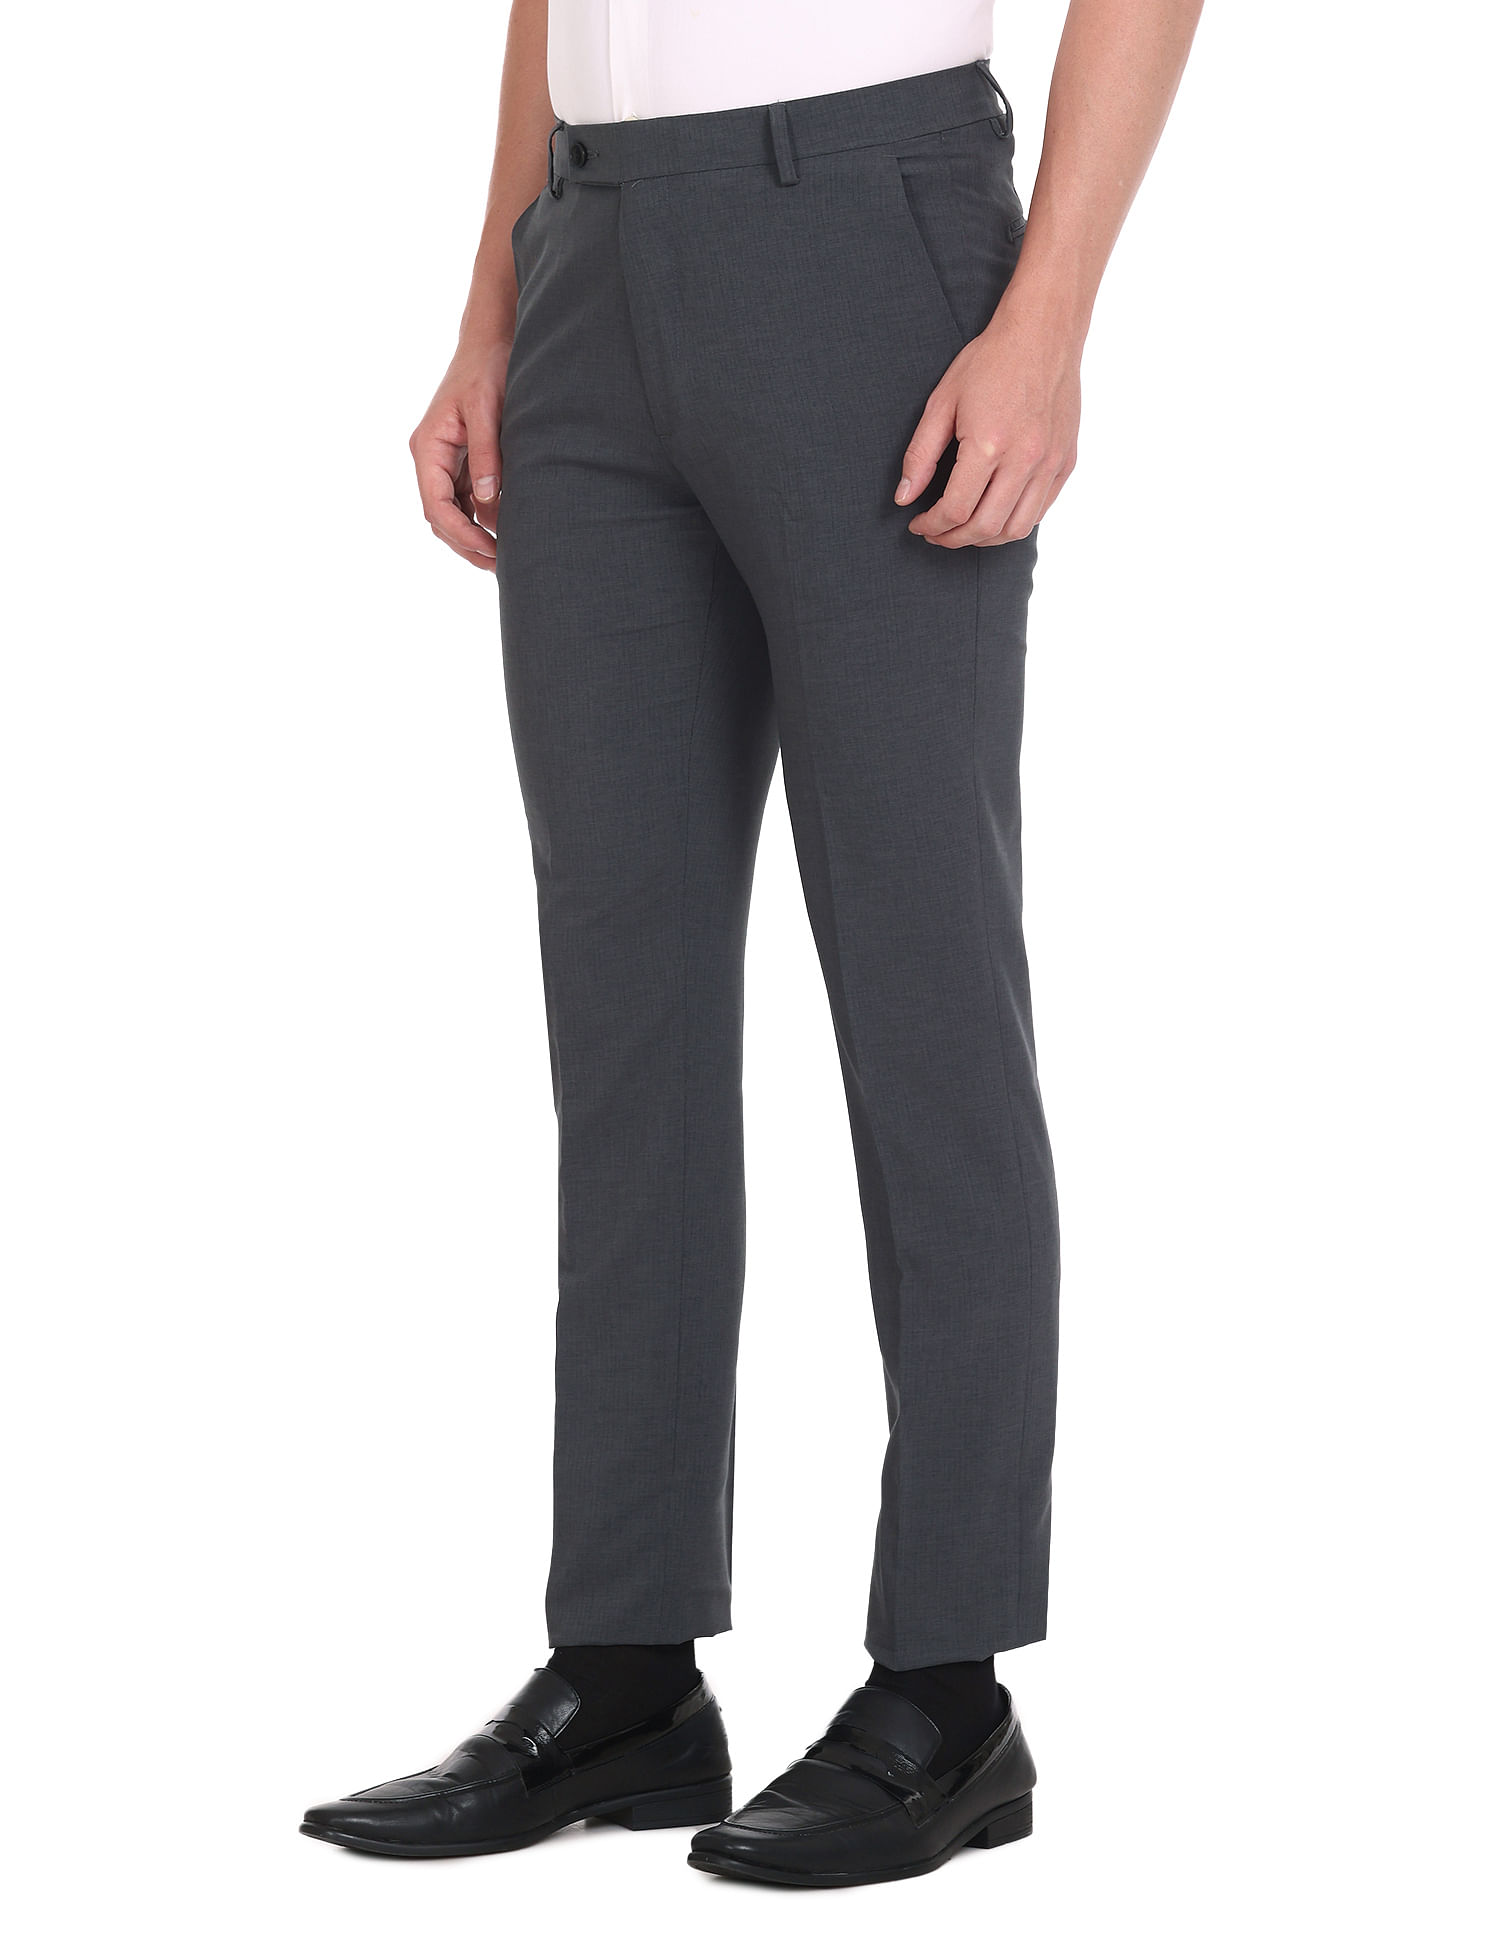 Buy Arrow Tailored Fit Dobby Formal Trousers online